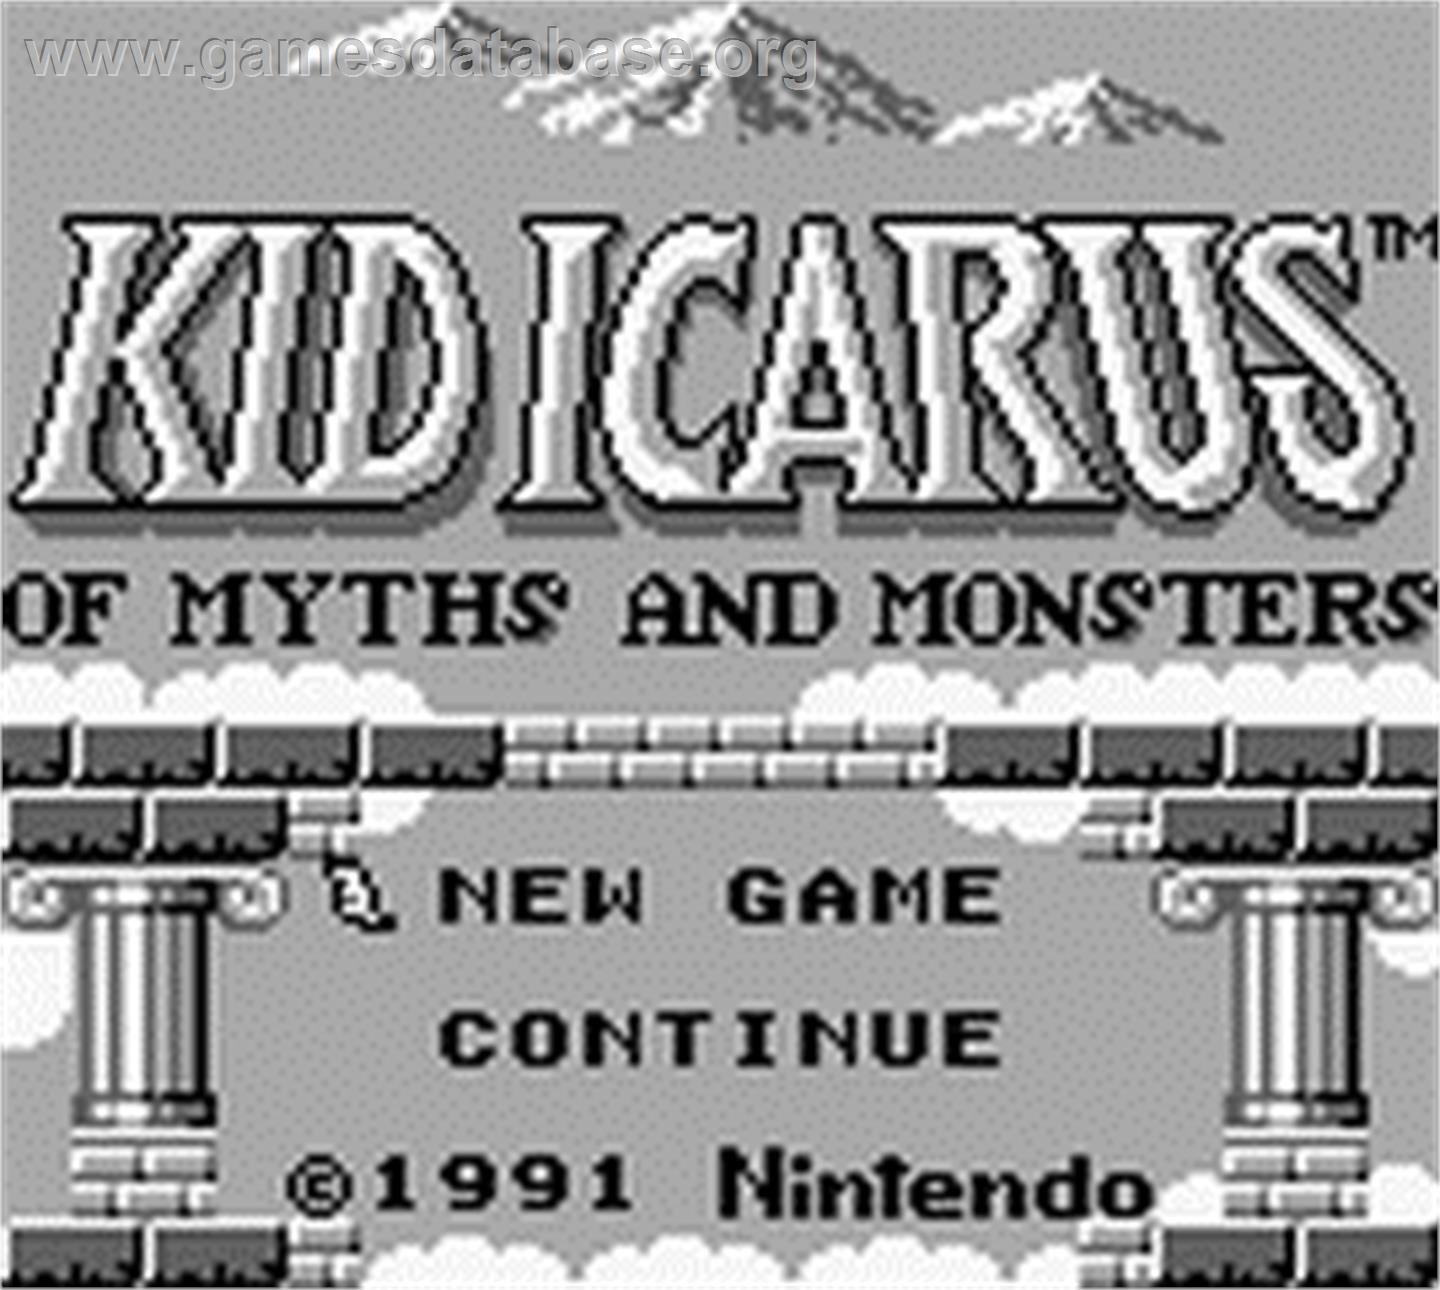 Kid Icarus: Of Myths and Monsters - Nintendo Game Boy - Artwork - Title Screen